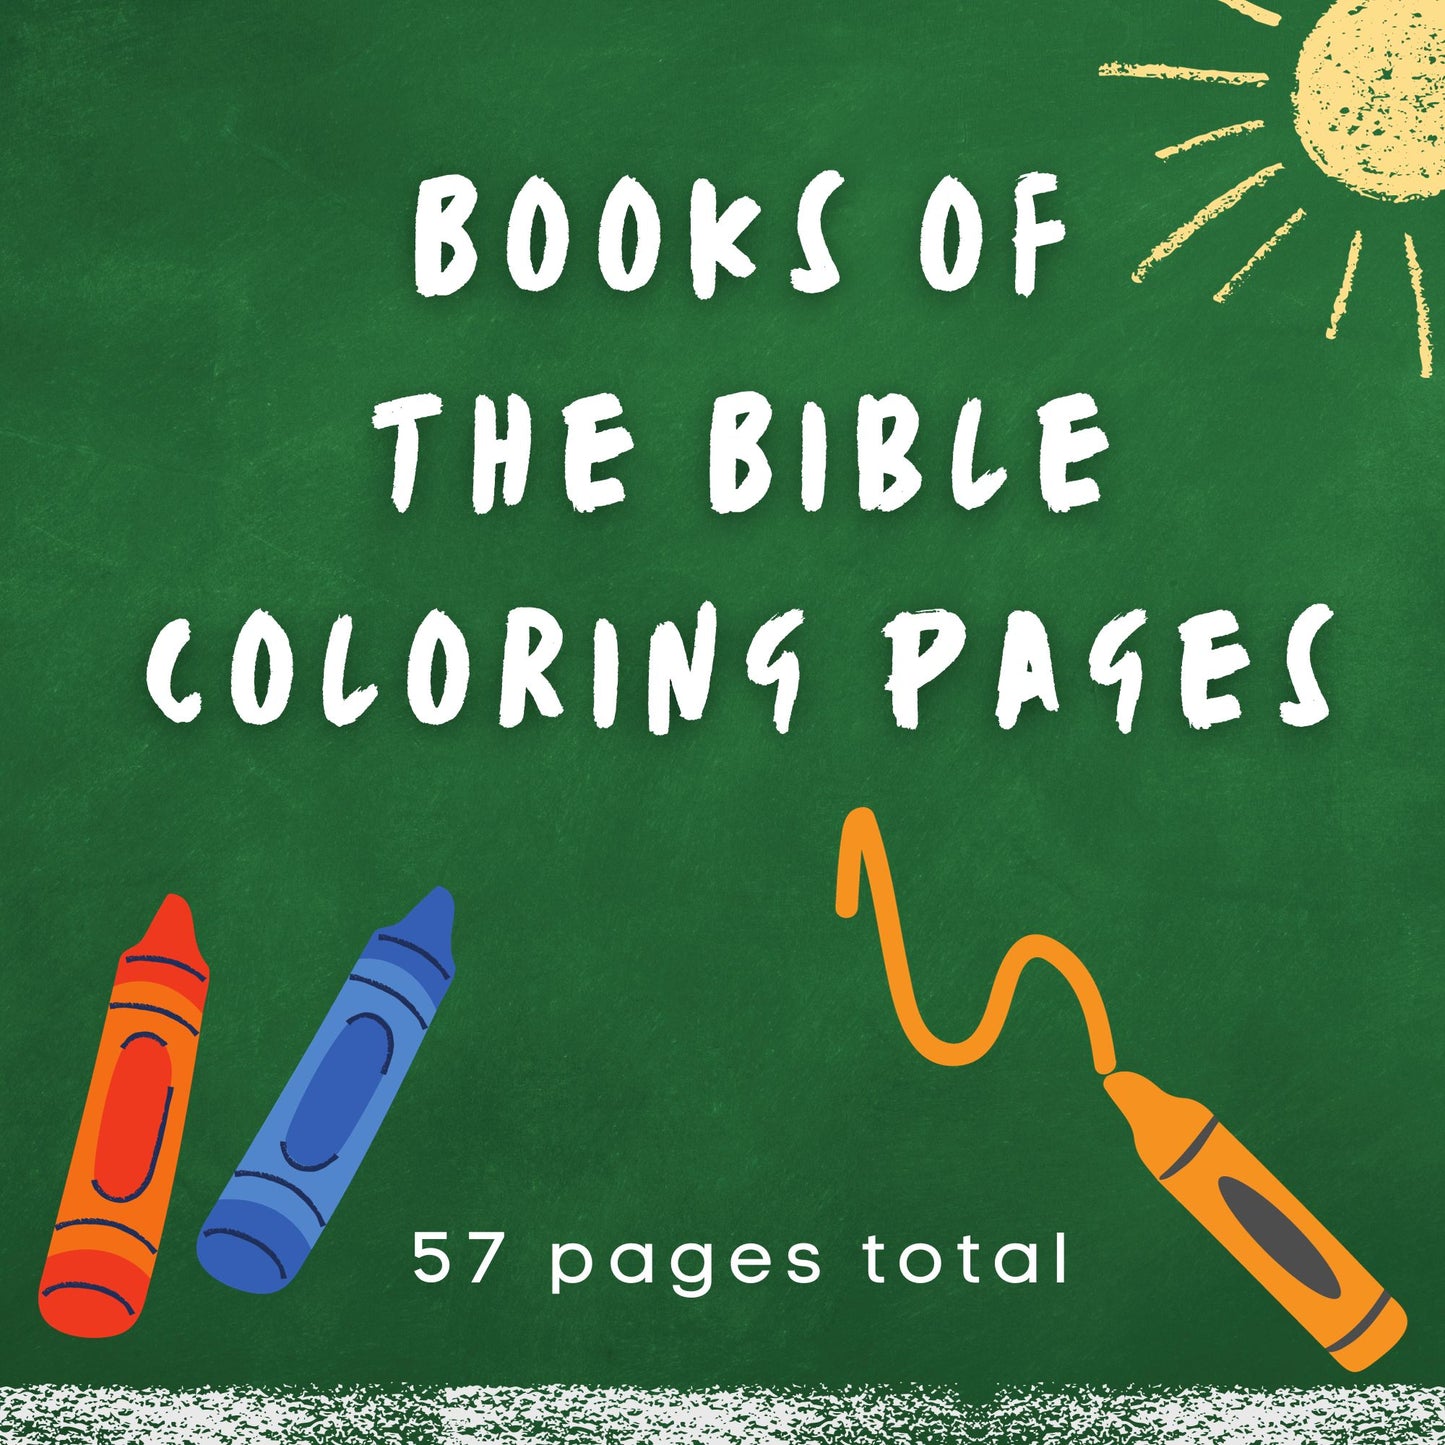 Books of the Bible Coloring Pages - NIV (download only)